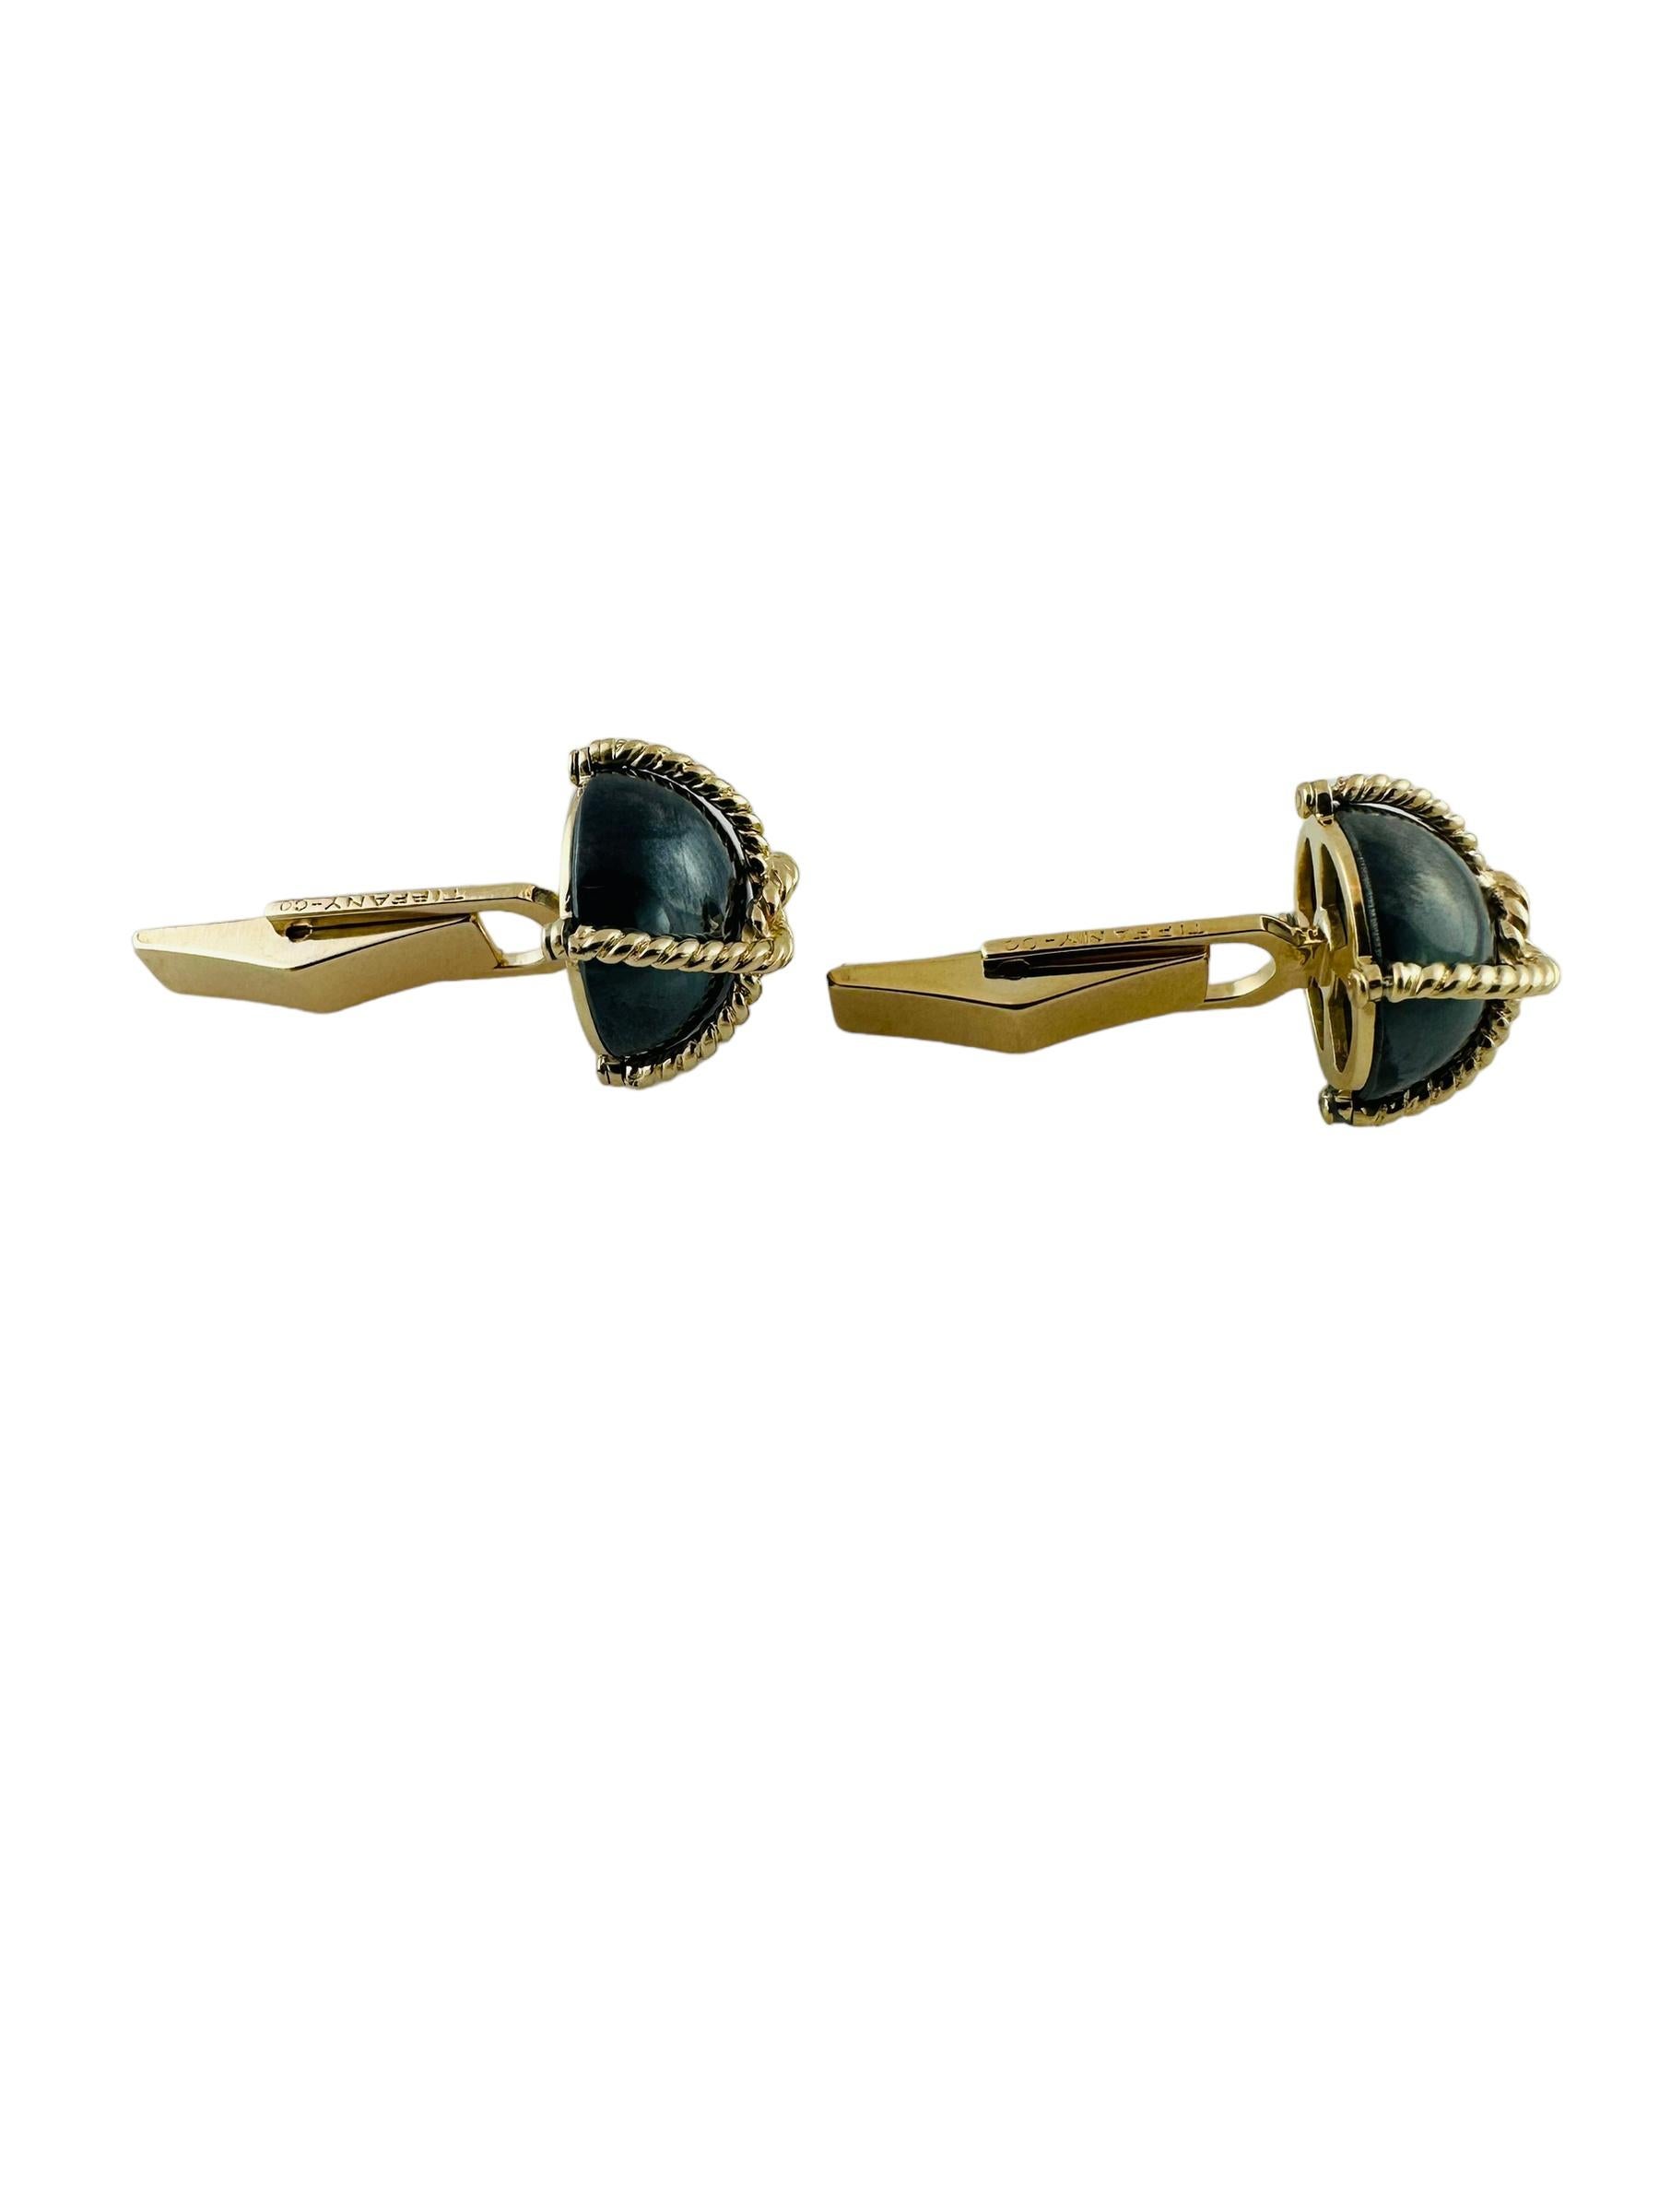 Vintage Tiffany & Co. 14K Yellow Gold Hematite Cable Cufflinks For Sale 3